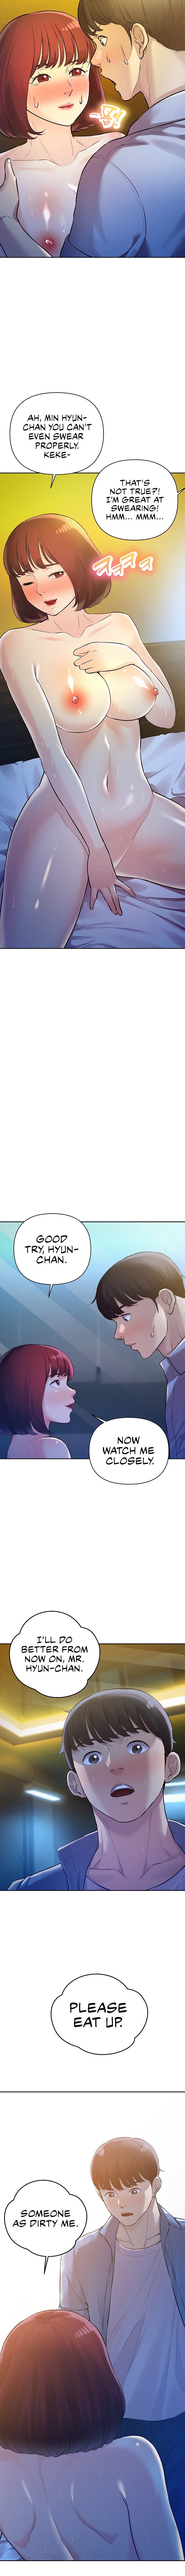 the-girls-i-couldnt-date-before-chap-27-1